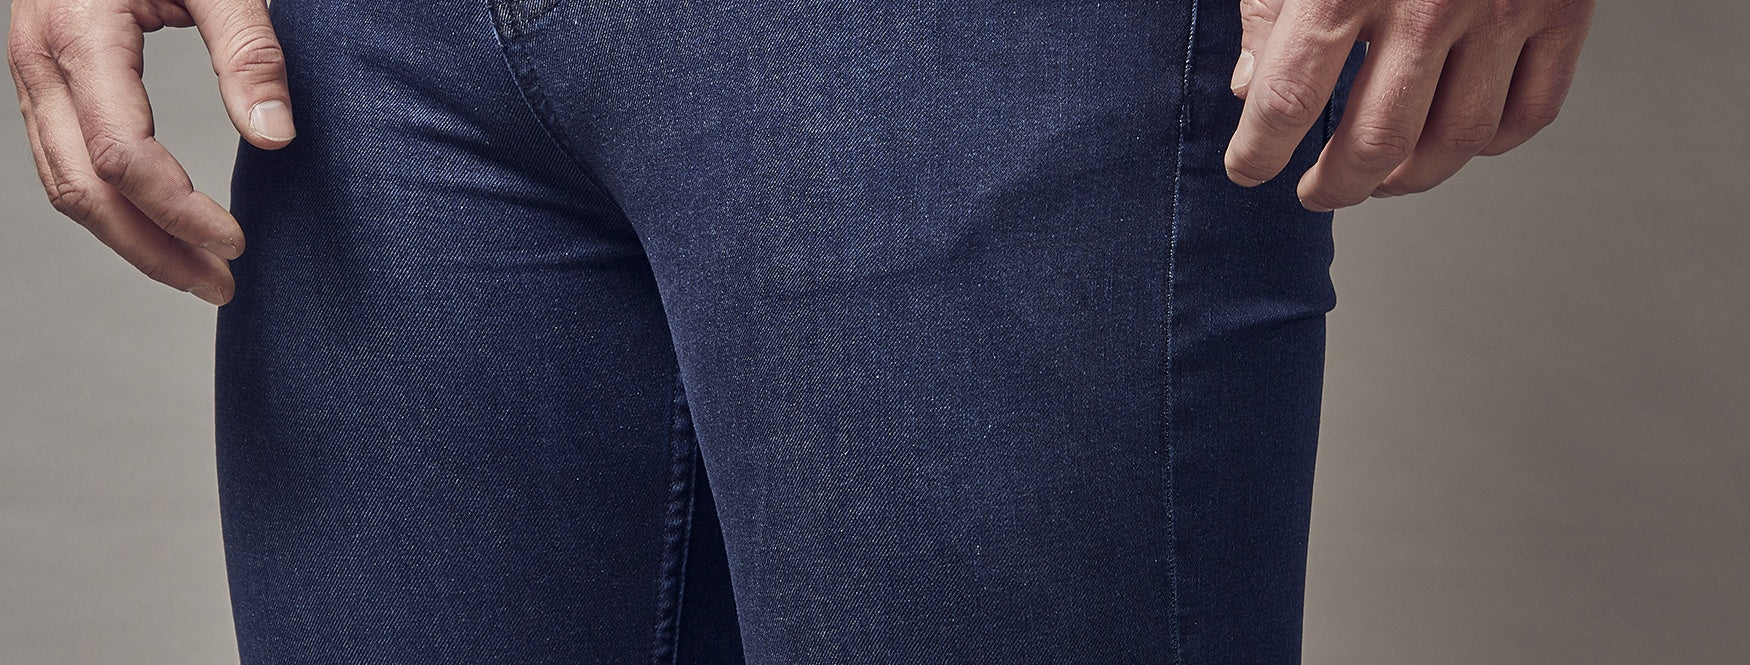 A detailed guide for hemming jeans and tapering them to perfection